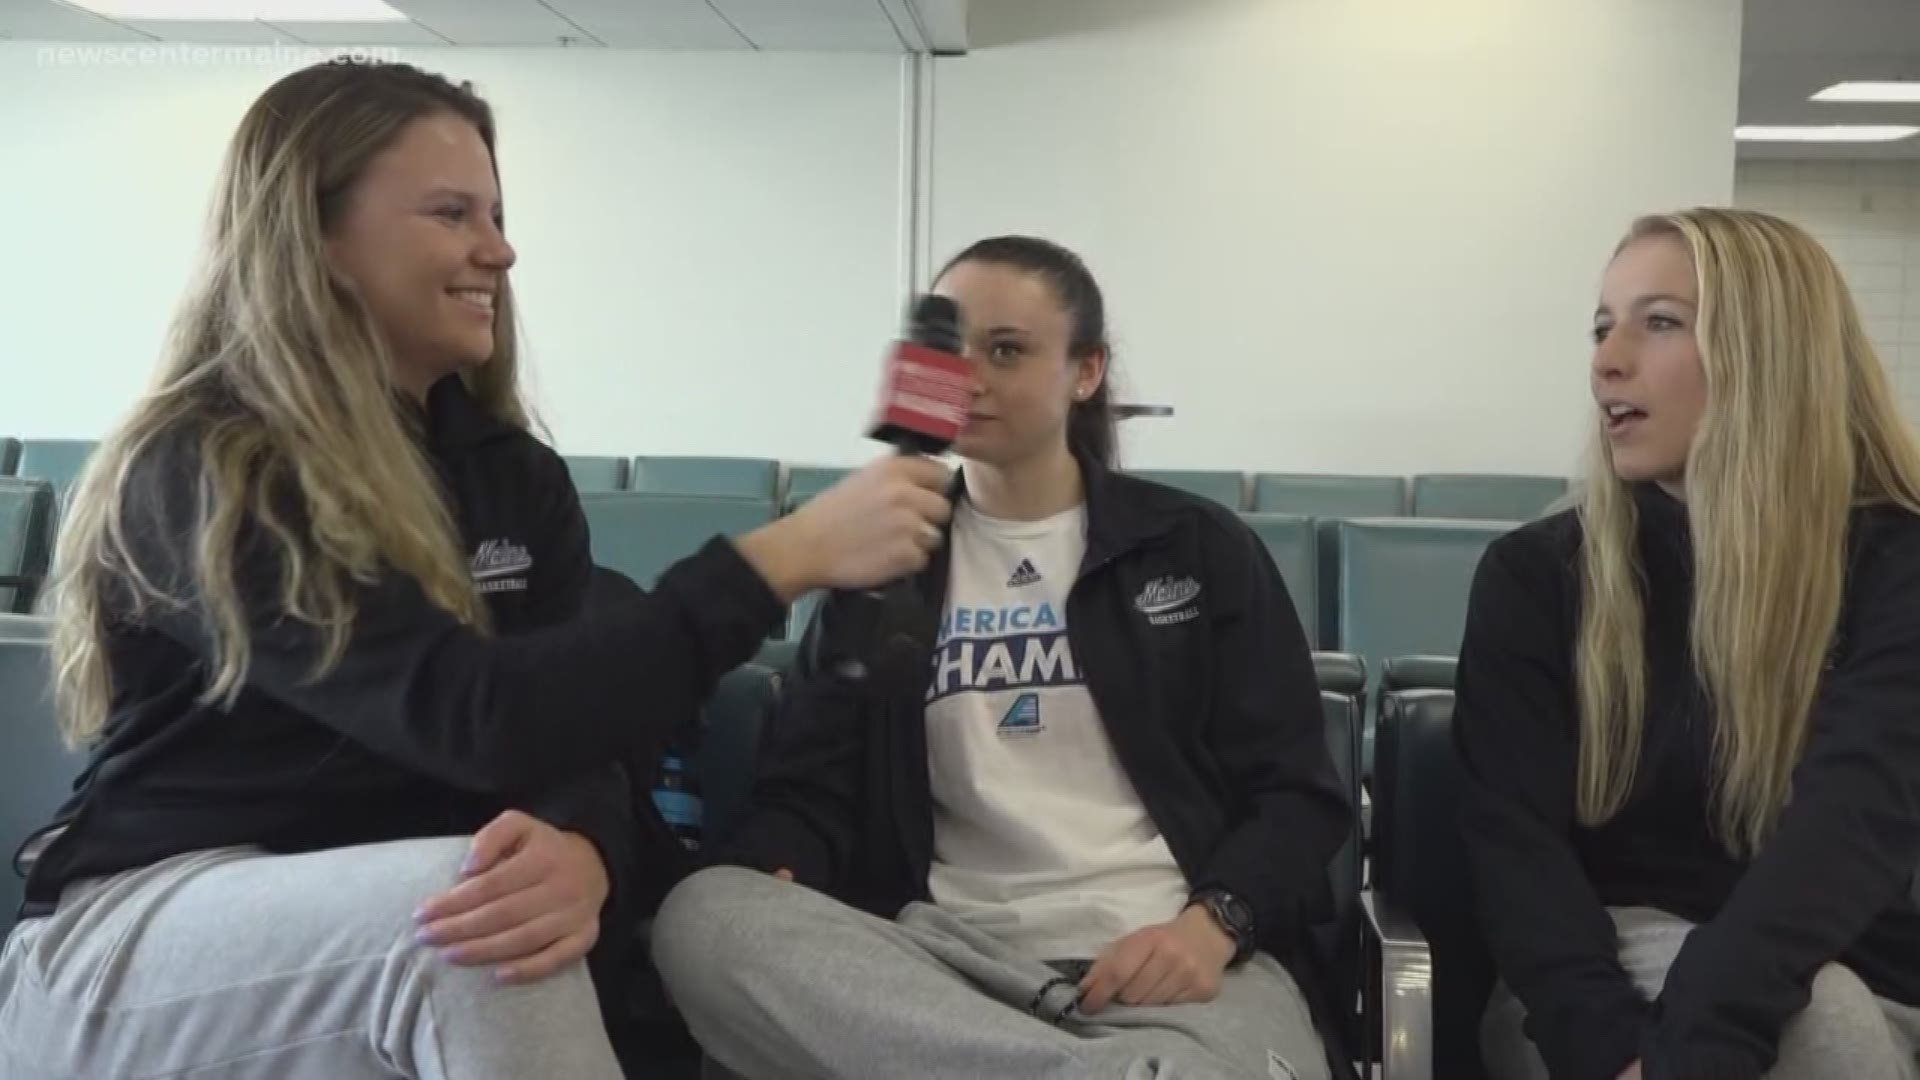 The Black Bears have some laughs ahead of tournament play.